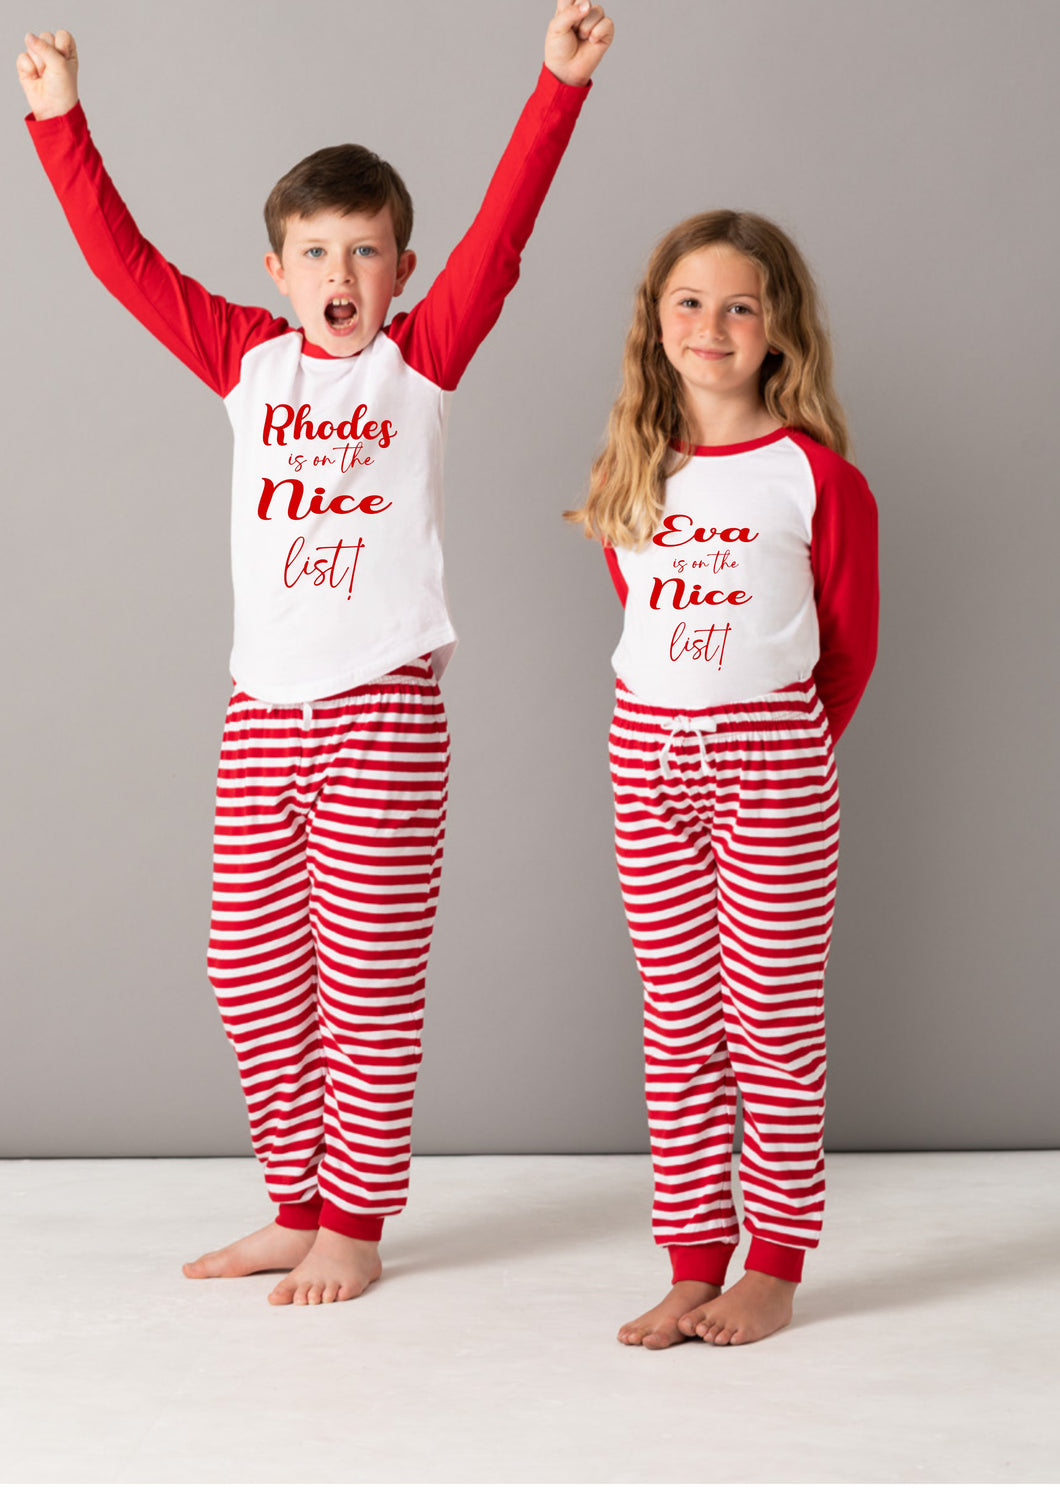 Personalised family matching Christmas xmas pjs pyjamas festive - nice list design - red stripes, long sleeves, your name